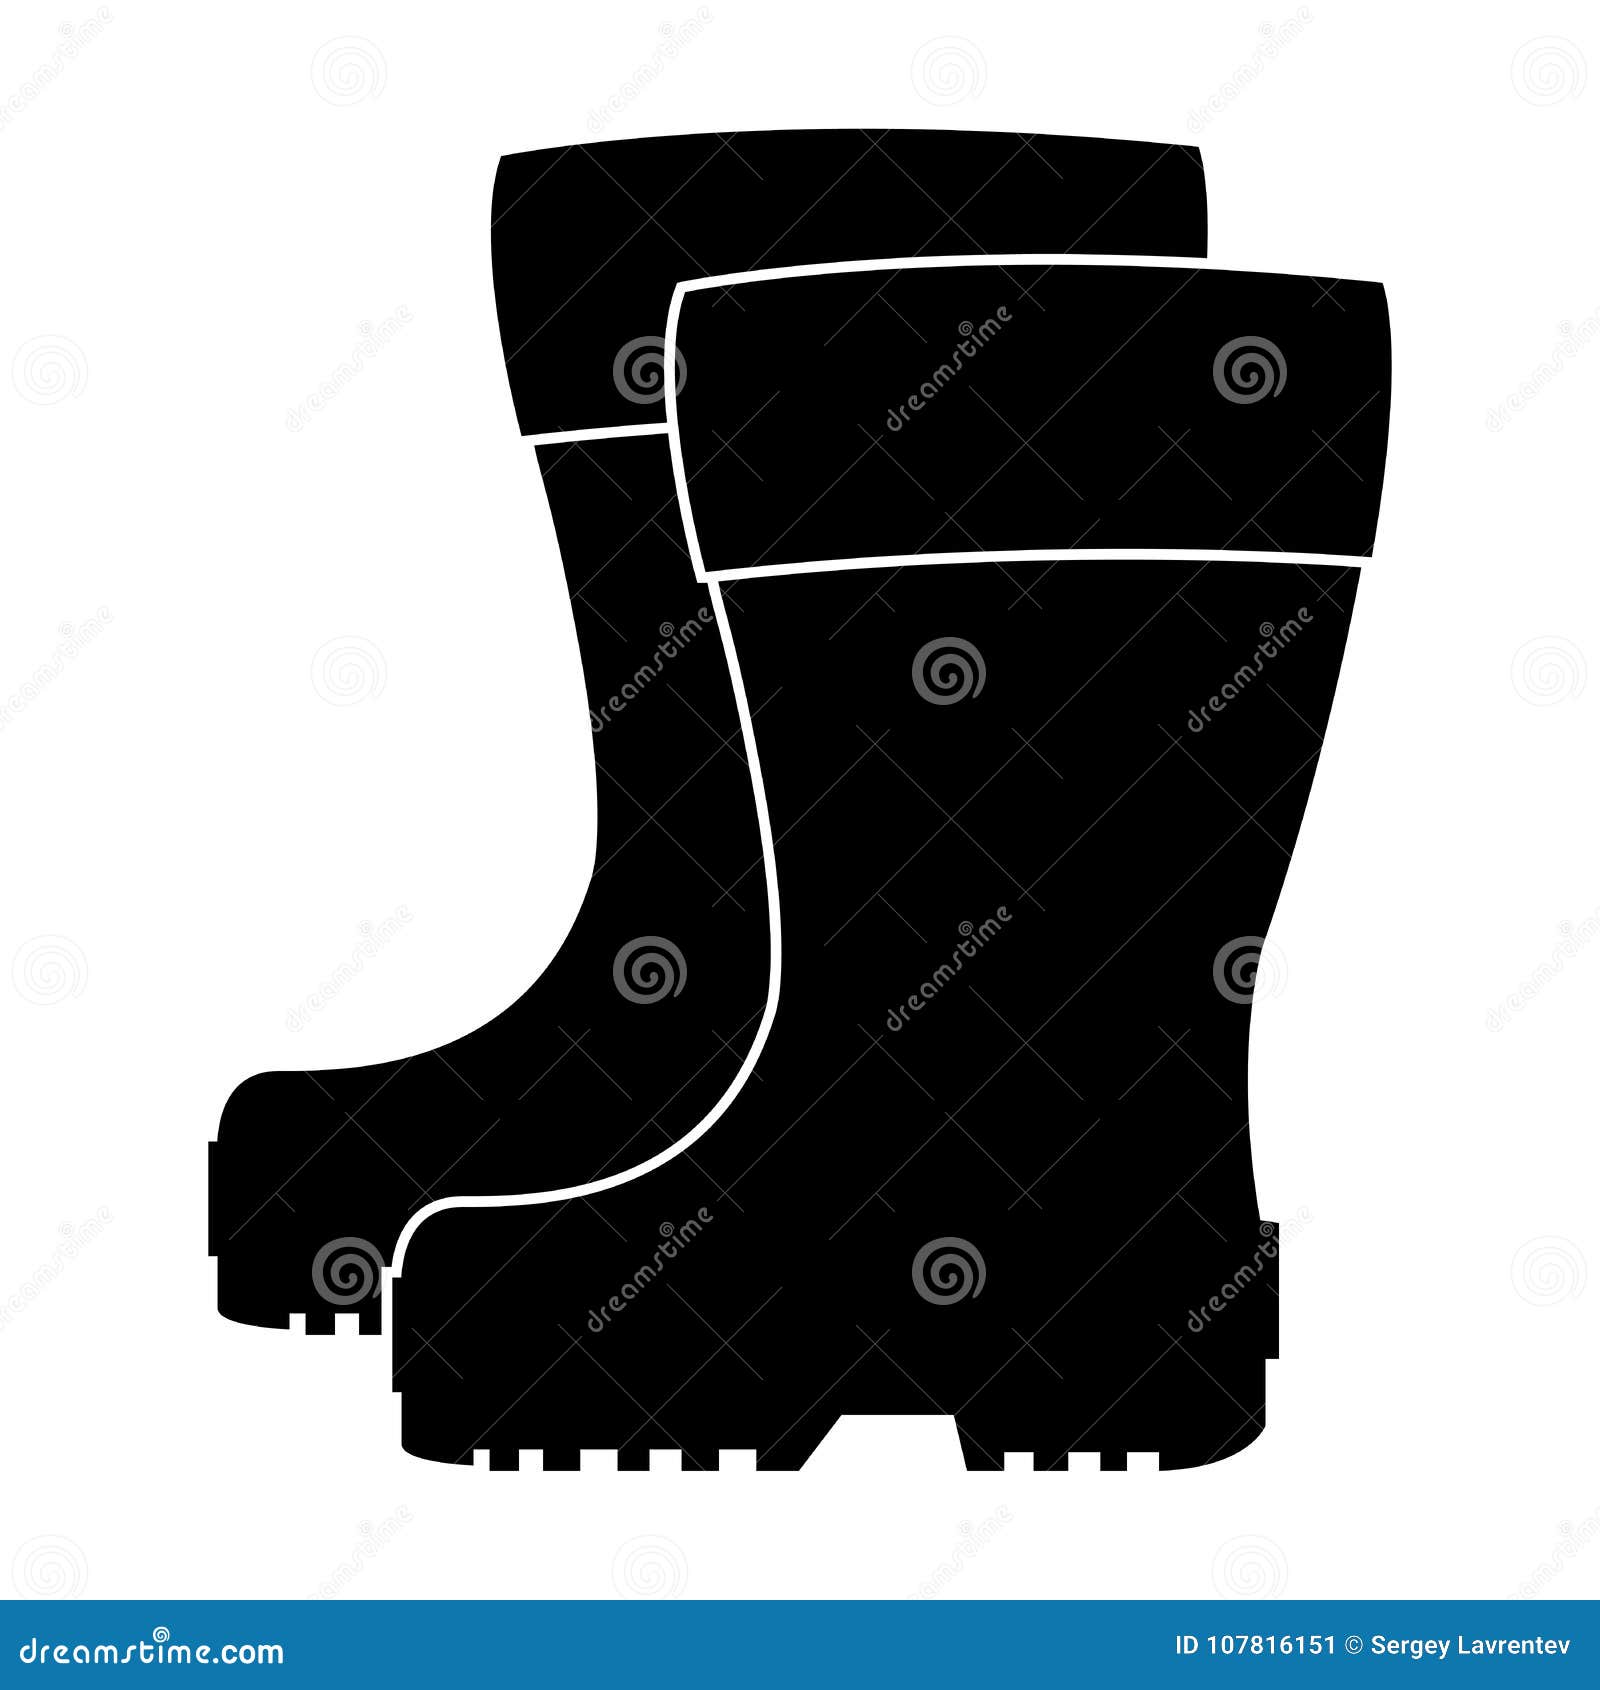 Rubber boots icon stock vector. Illustration of waterproof - 107816151